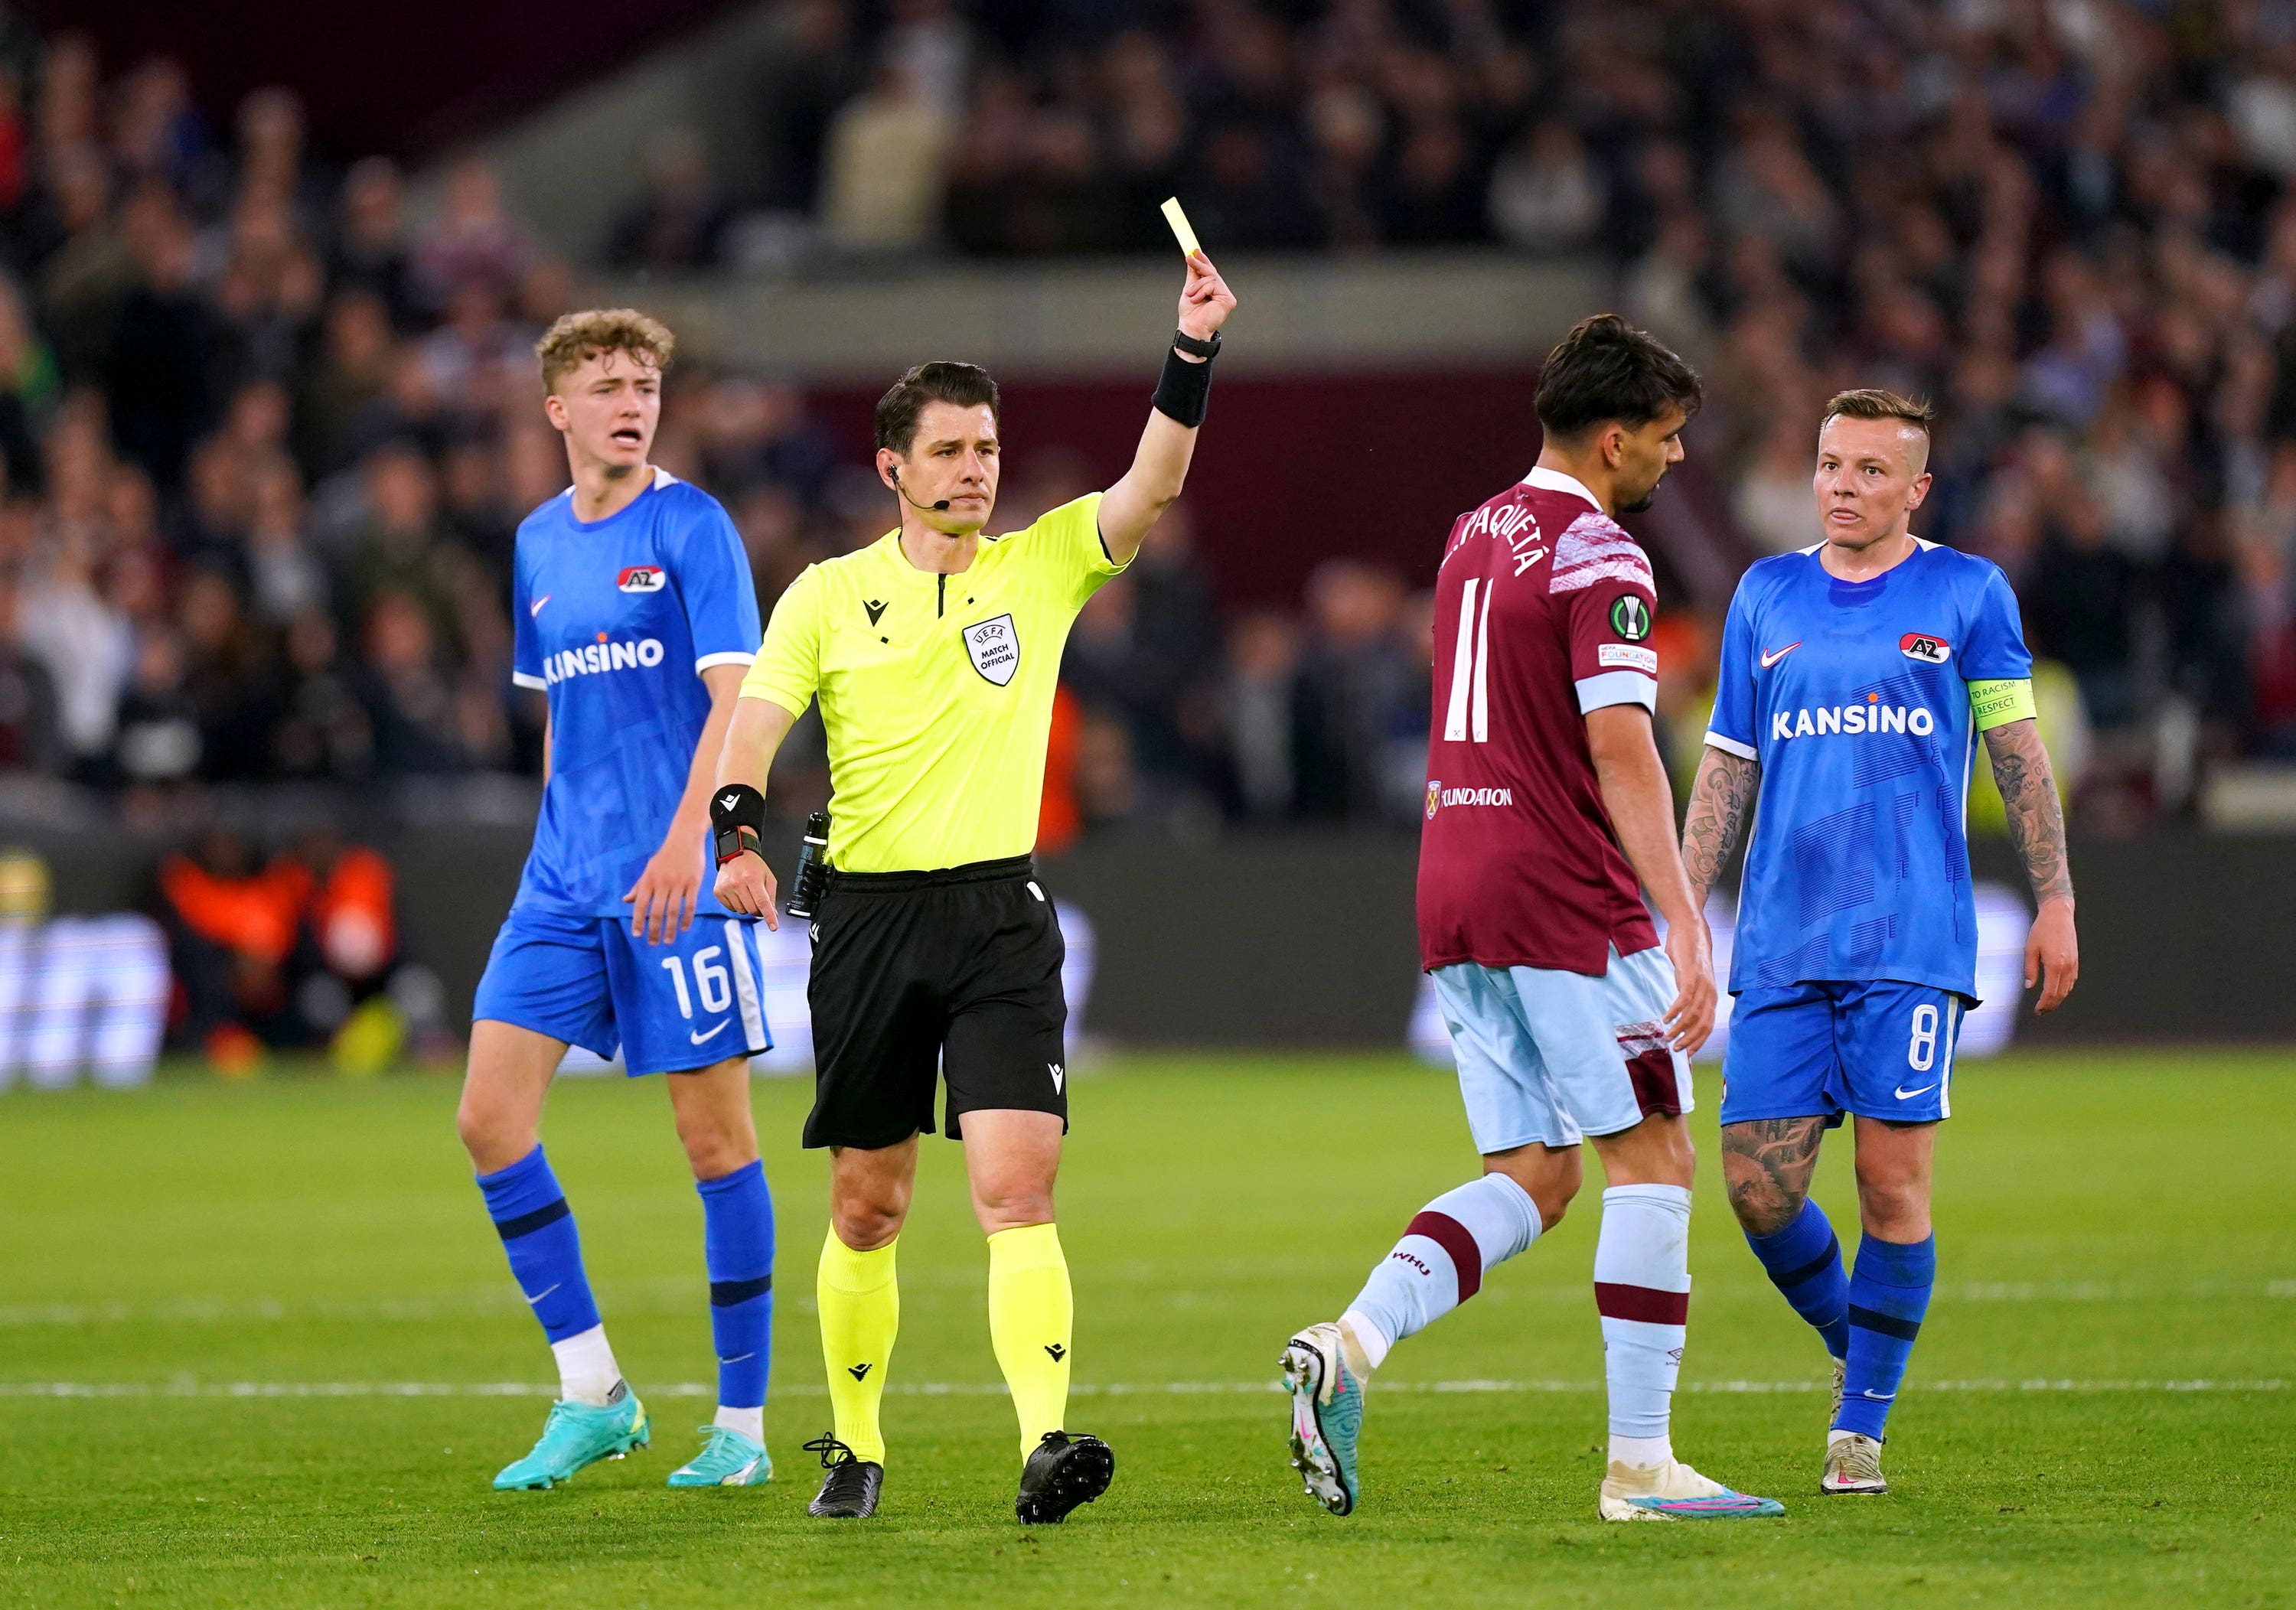 <em>Halil Umut Meler took charge of West Ham’s UEFA Conference League semi-final against AZ Alkmaar (Mike Egerton/PA)</em>”/><cite class=cite></cite></div><figcaption aria-hidden=true><em>Halil Umut Meler took charge of West Ham’s UEFA Conference League semi-final against AZ Alkmaar (Mike Egerton/PA)</em> <cite class=hidden></cite></figcaption></figure><p>Turkey’s president, Recep Tayyip Erdogan, was quoted in Turkish media condemning the attack, and the Turkish Football Federation swiftly announced the suspension.</p><p>In a statement, it blamed the “despicable attack” on a years-long toxic culture towards referees that it said had been fostered by many players and club officials.</p><p>“The irresponsible statements of club presidents, managers, coaches and TV commentators targeting referees have paved the way for this vile attack today,” said the TFF.</p><p>“In coordination with our State, all the criminal proceedings they deserve have begun to be implemented against those responsible and instigators of this inhumane attack. The responsible club, its president, its managers and all criminals who attacked Meler will be punished in the most severe way.</p><p>“By the decision of the TFF Board of Directors, matches in all leagues have been postponed indefinitely.”</p><p>According to Turkish media, both Meler and Koca were subsequently taken to hospital, with Koca under guard and expected to be detained following treatment.</p><p>The 37-year-old Meler is on UEFA’s elite list and has previously officiated in the UEFA Europa League. He also took charge of West Ham’s Conference League semi-final first leg against AZ Alkmaar last season.</p><p>President Erdogan said in a statement: “I condemn the attack on referee Halil Umut Meler after the MKE Ankaragucu-Caykur Rizespor match played this evening, and I wish him a speedy recovery.</p><p>“Sports means peace and brotherhood. Sports are incompatible with violence. We will never allow violence to take place in Turkish sports.”</p><p>MKE Ankaragucu apologised for the attack by their president issuing a statement which read: “We are saddened by the incident that took place this evening. We apologise to the Turkish football public and the entire sports community for the sad incident that occurred after the Caykur Rizespor match at Eryaman Stadium.”</p><p>Caykur Rizespor responded by condemning the attack and wishing Meler a speedy recovery. A statement on their website read: “We strongly condemn the undesirable events that occurred after the Ankaragücü match we played today. We wish the entire referee community, especially the referee of the match, Halil Umut Meler, to get well soon.”</p><div class=